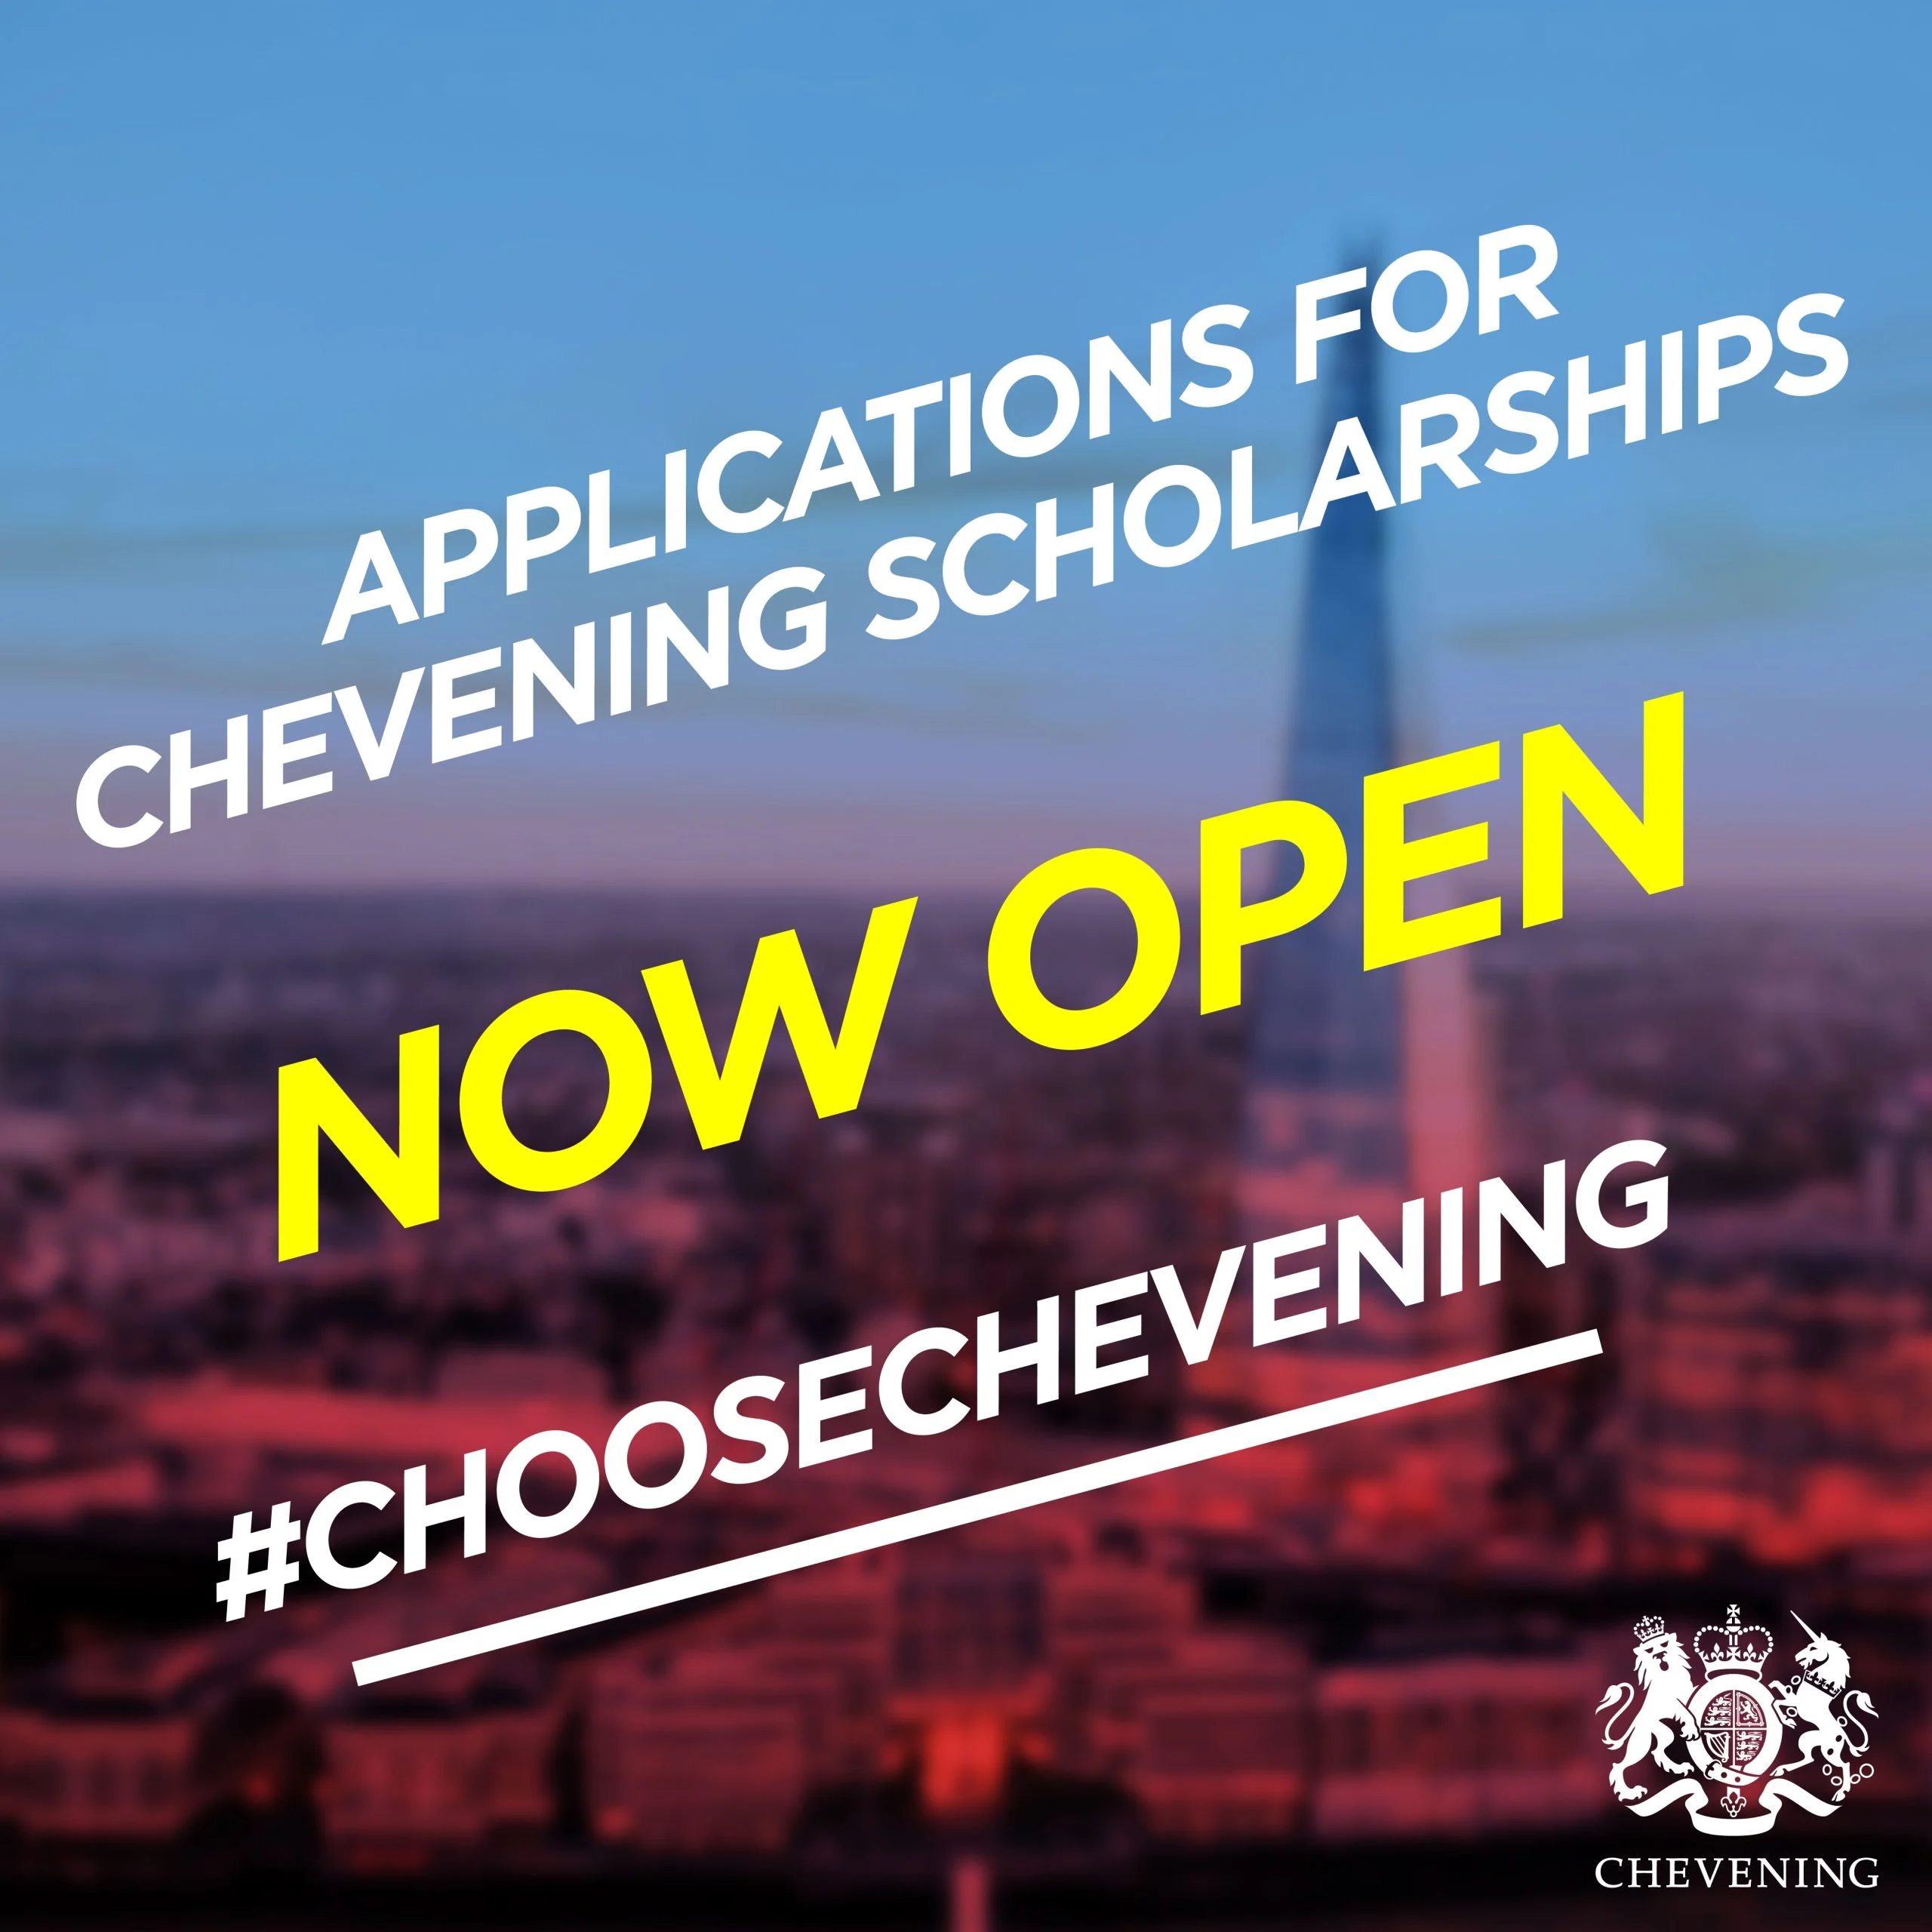 relationship building and shared learning essay for chevening scholarship